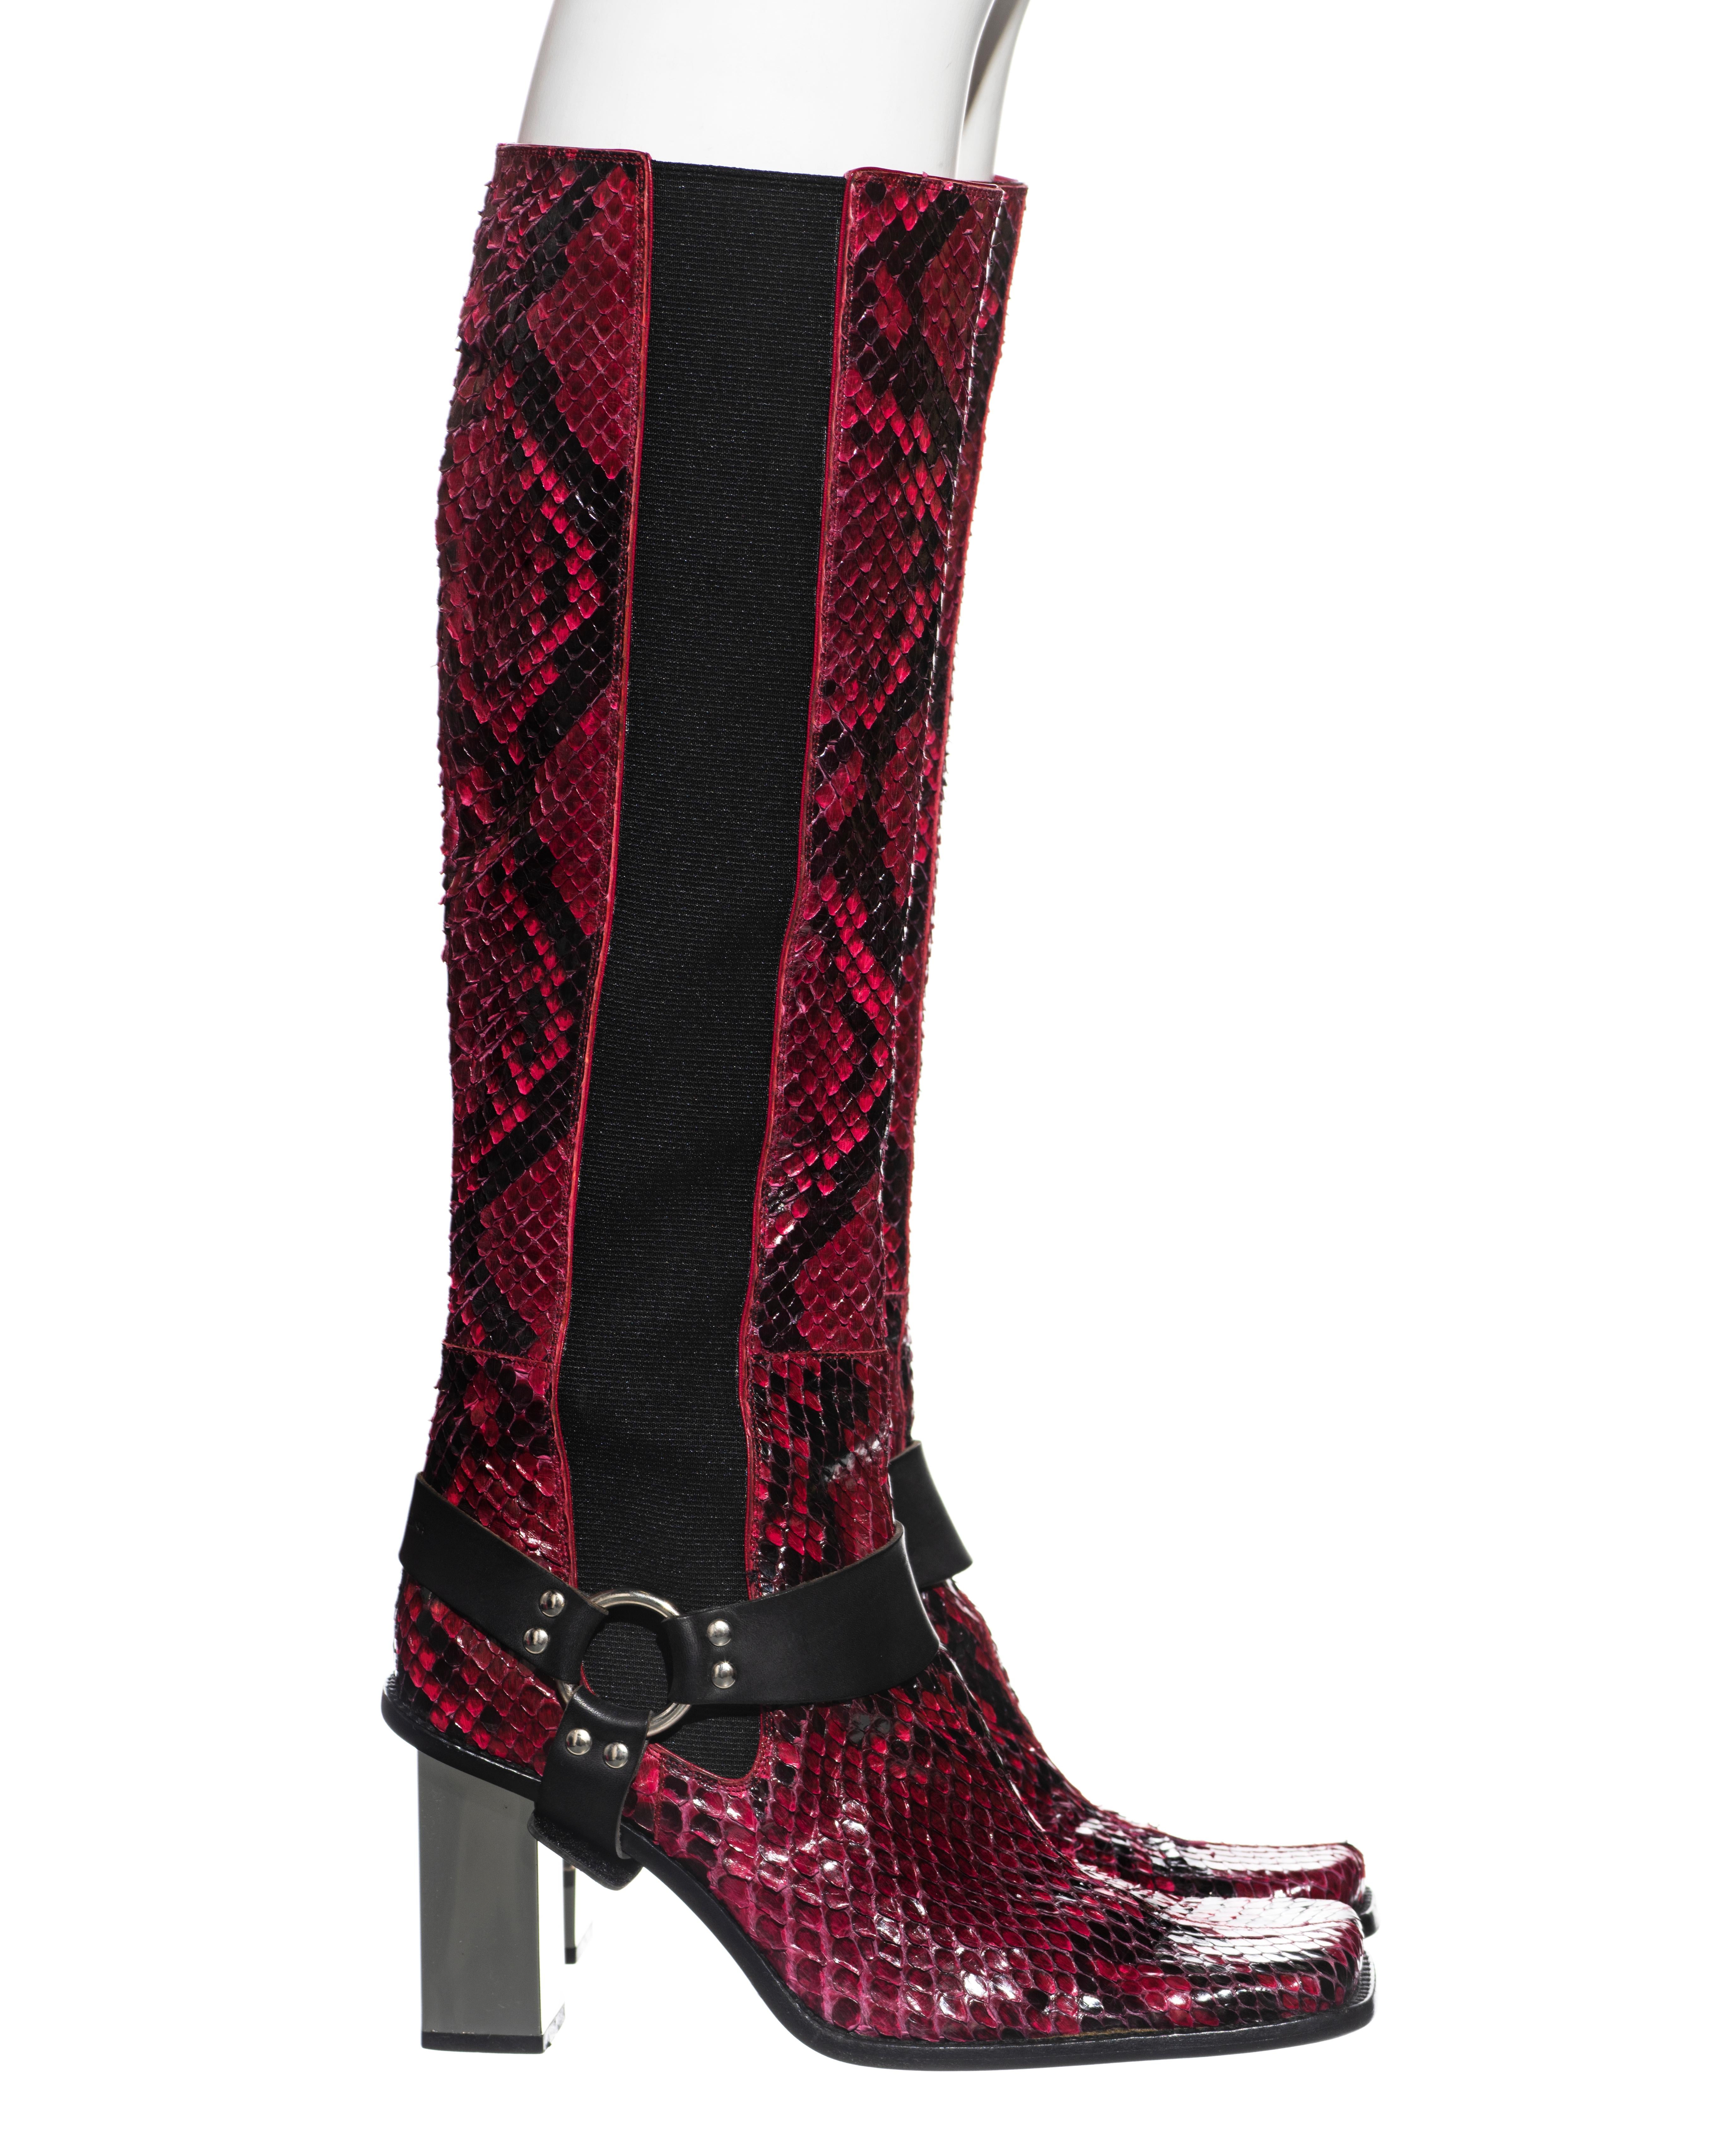 Dolce & Gabbana raspberry python boots with mirrored heels, fw 1999 For Sale 2